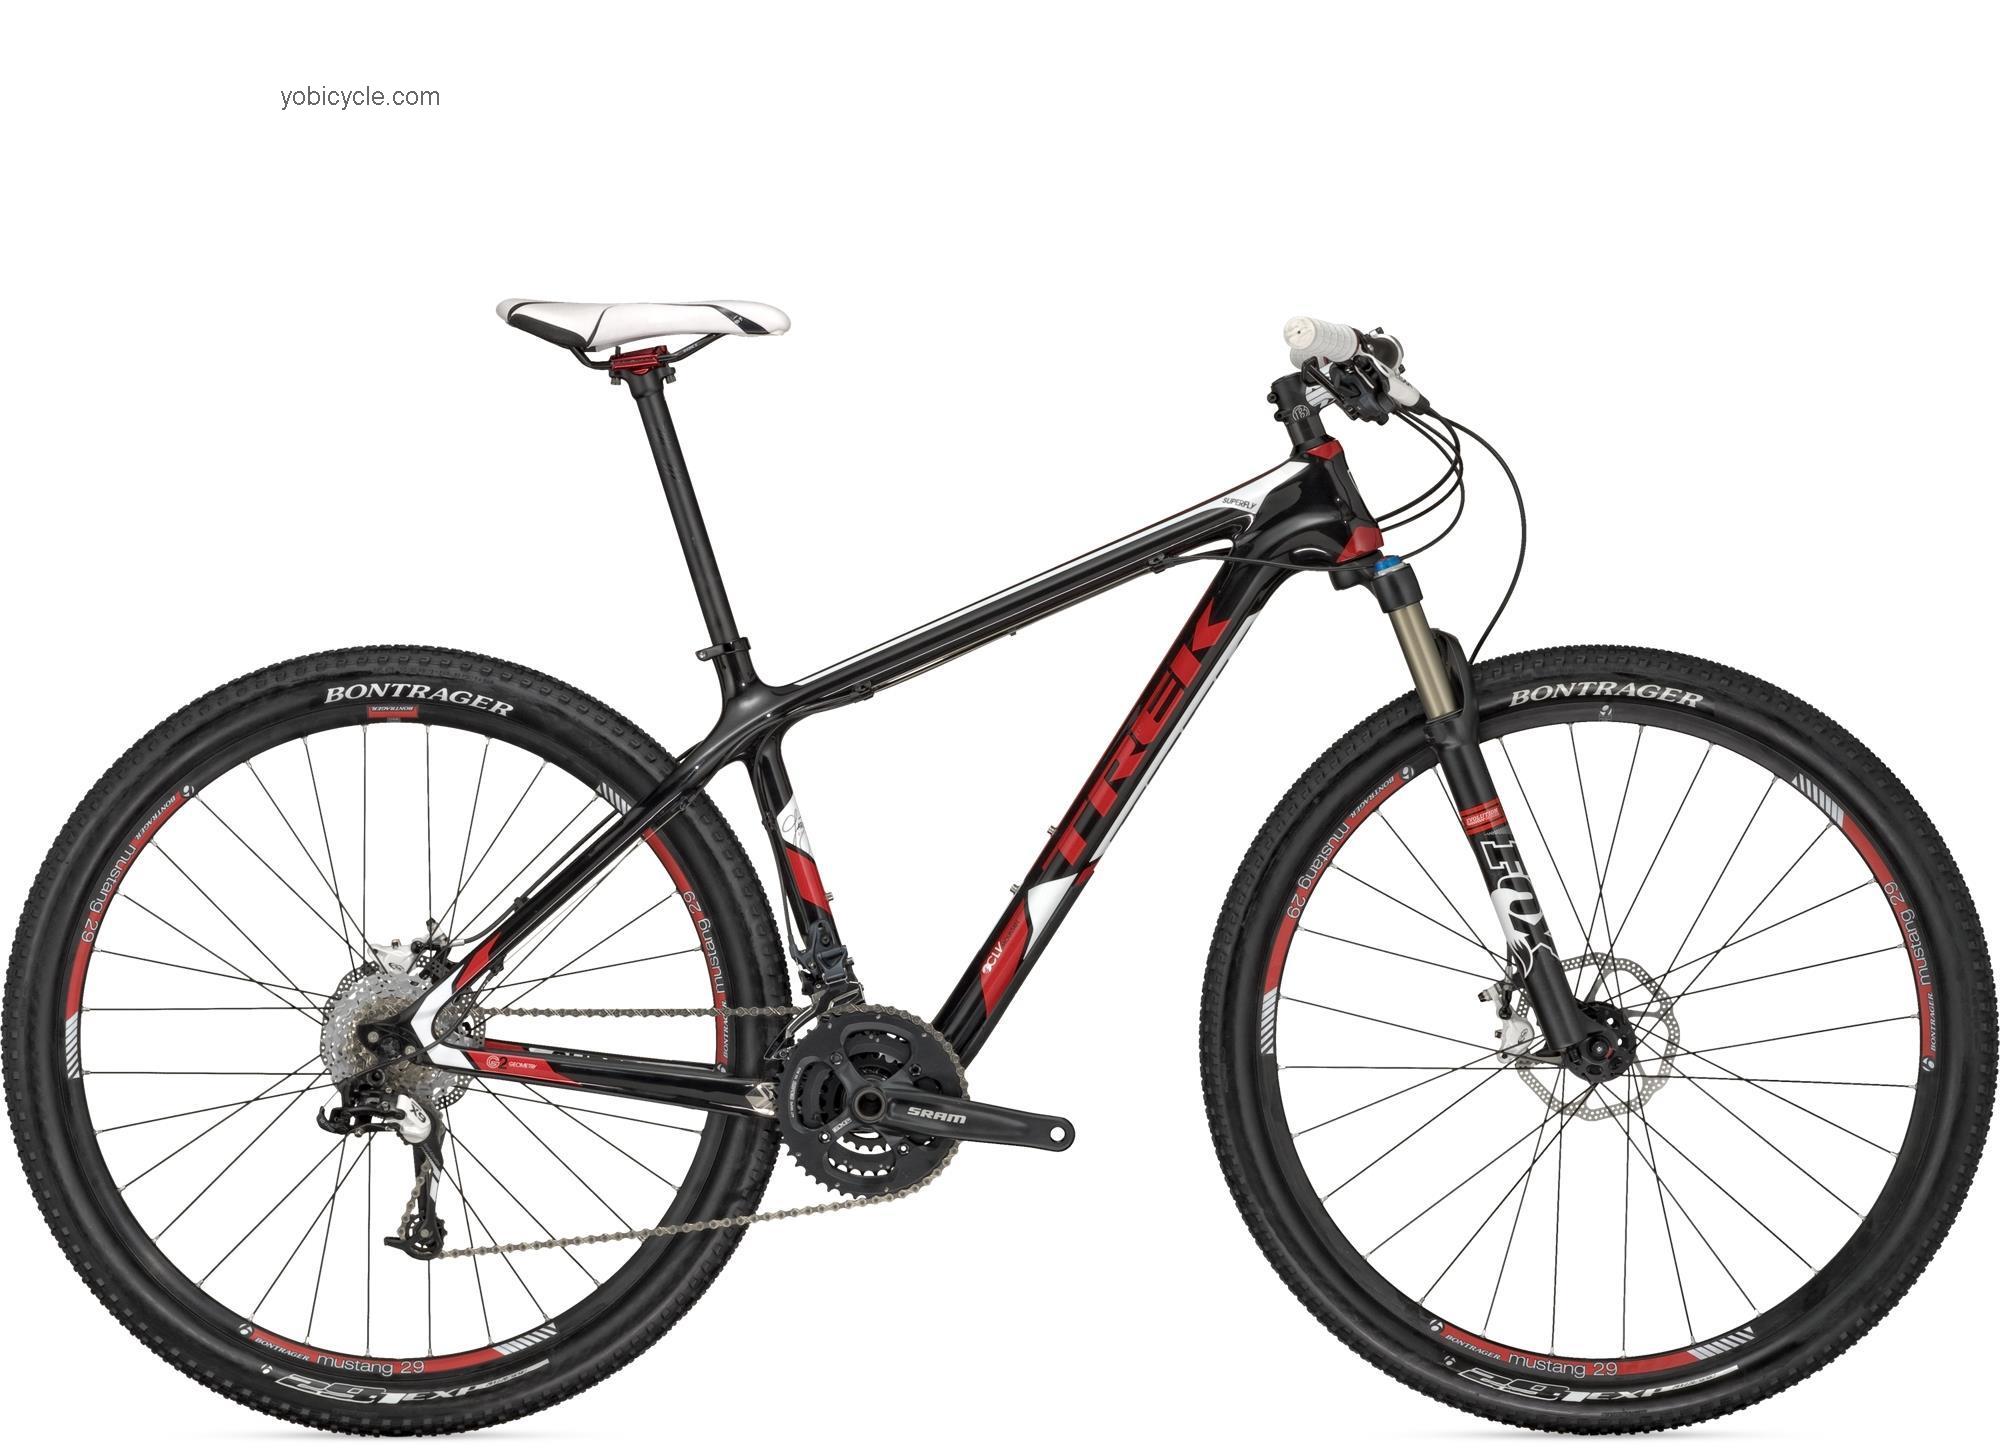 Trek Superfly 2012 comparison online with competitors